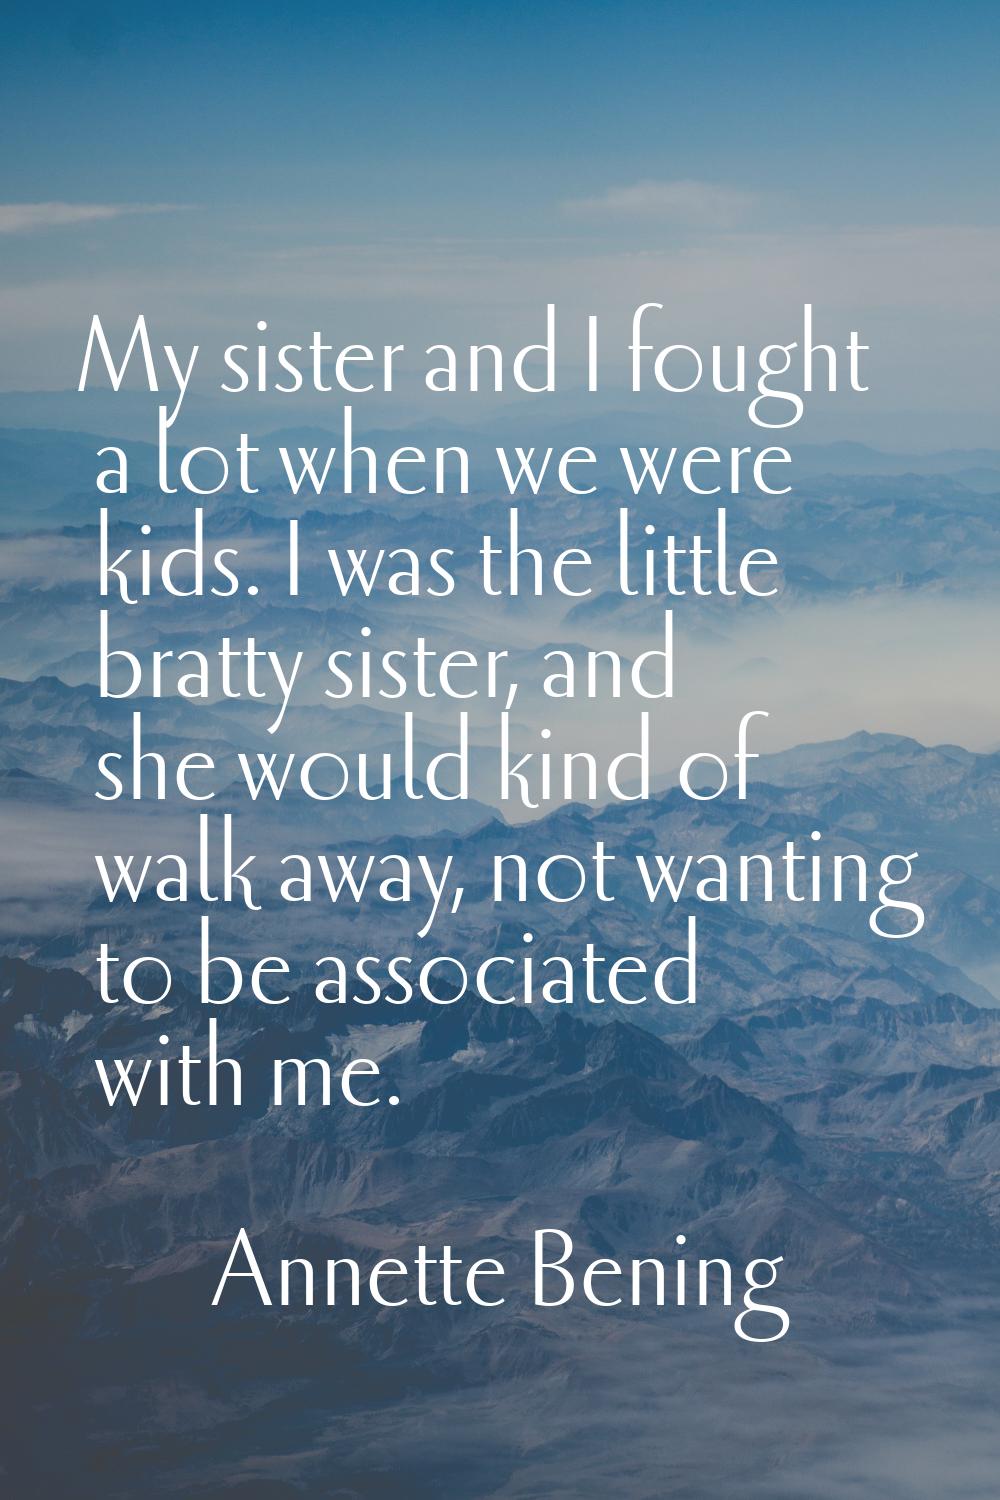 My sister and I fought a lot when we were kids. I was the little bratty sister, and she would kind 